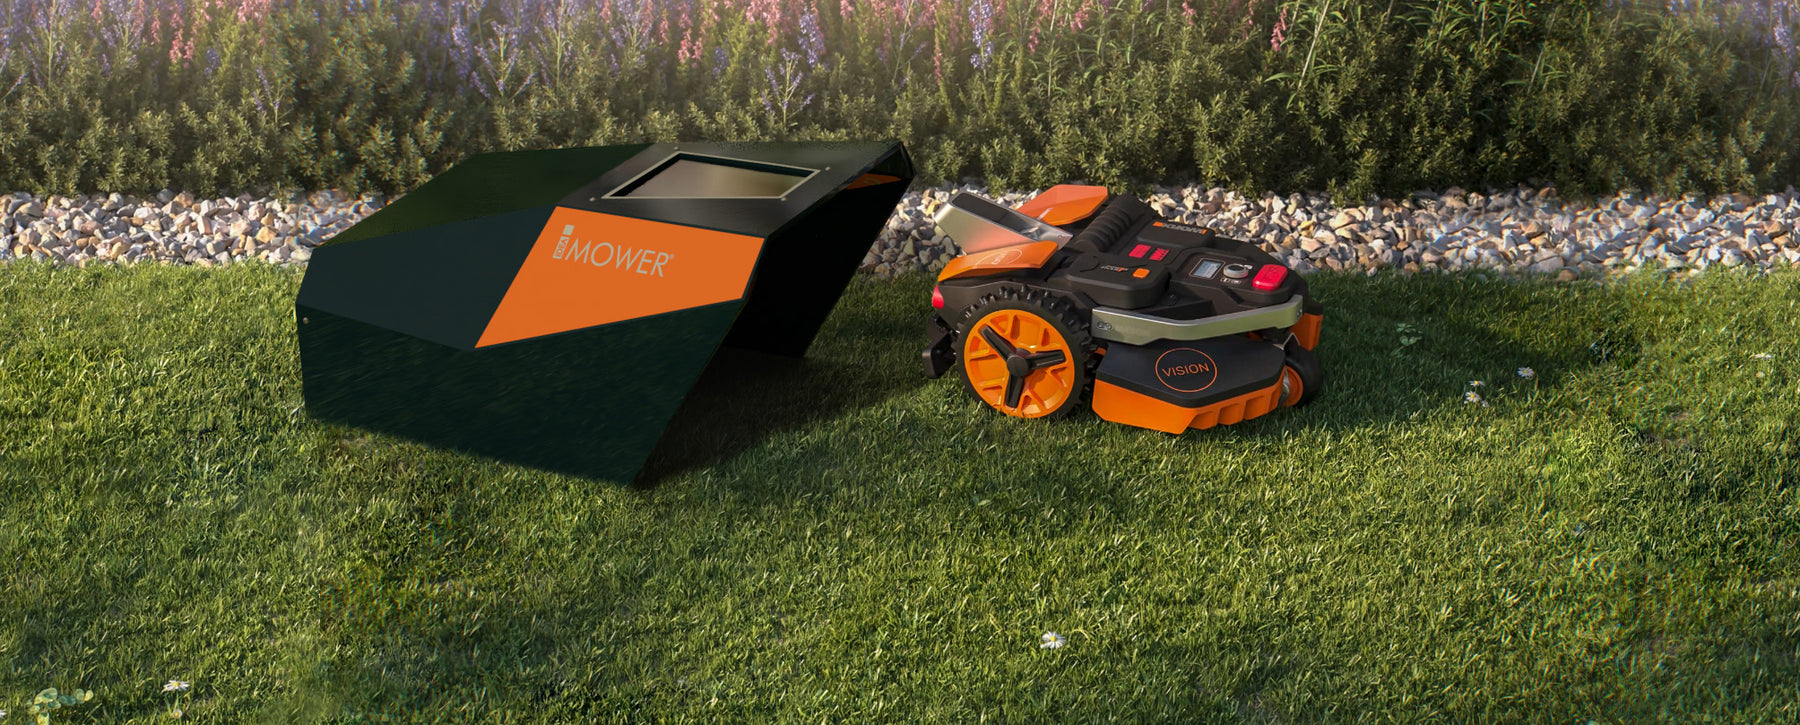 Cyber lawnmower garage compatible with Worx Landroid Vision – Idea Mower